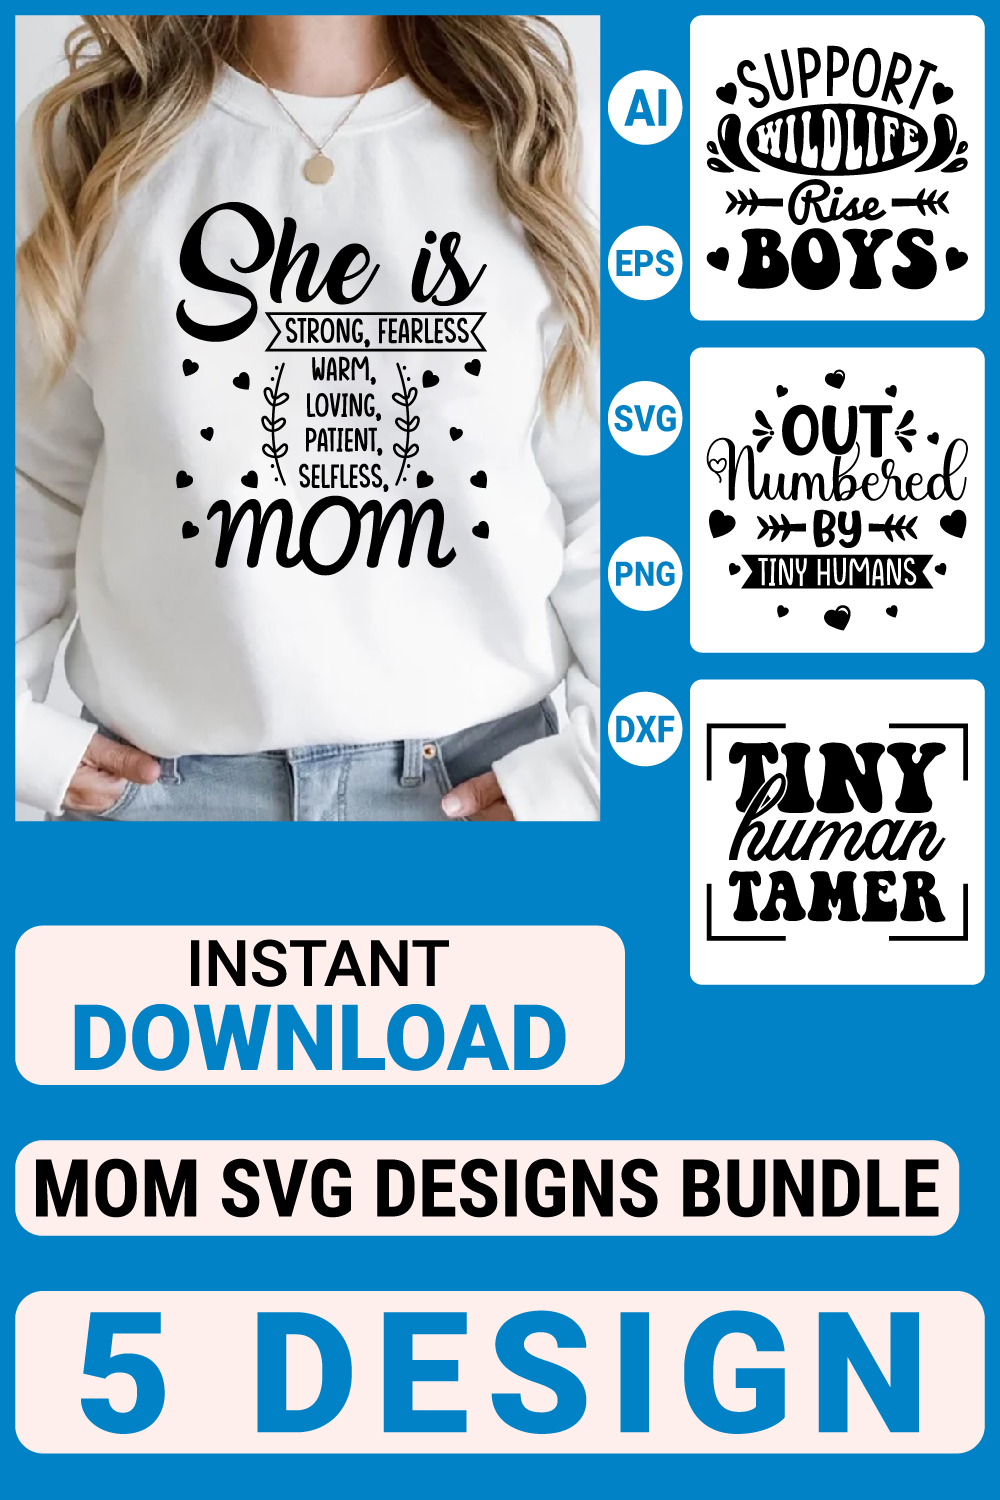 Mom Svg Bundle Designs , Mother's Day Quotes typography Graphic T-shirt Collection pinterest preview image.